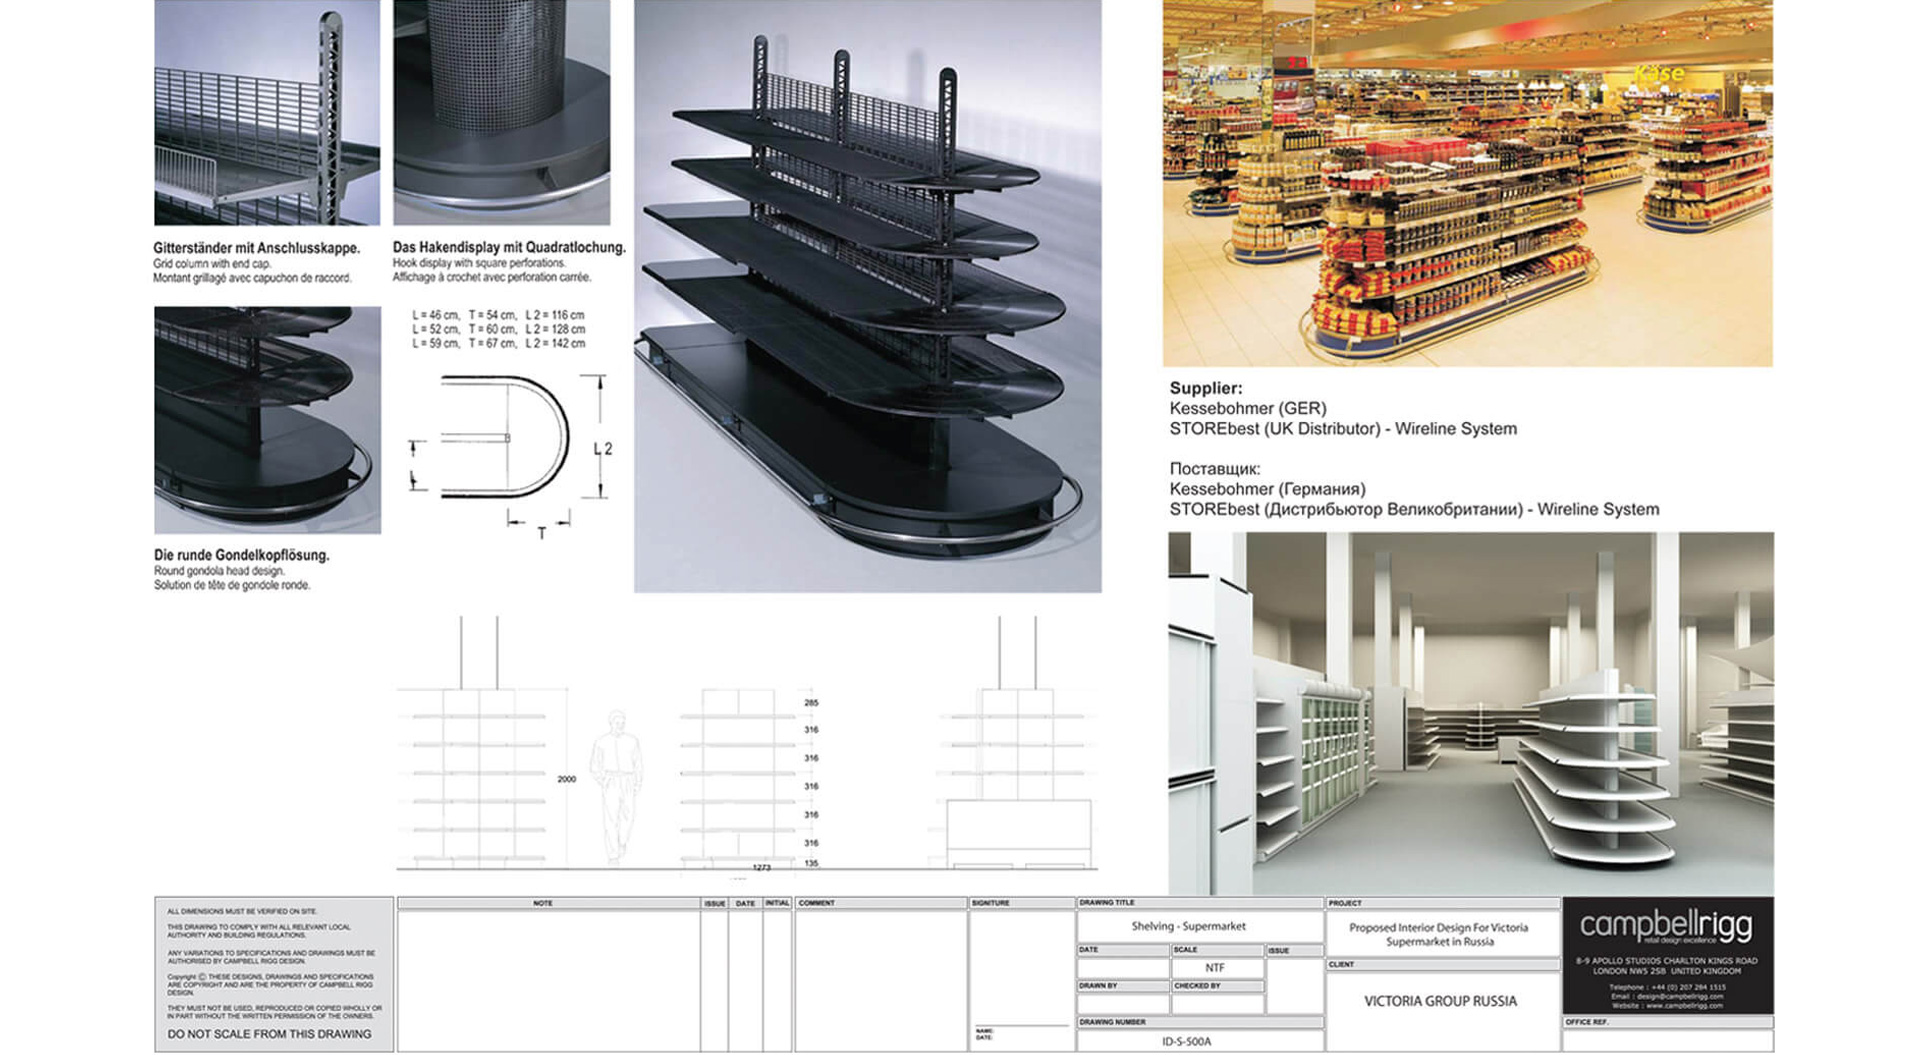 Victoria supermarkets Russia in-store shelving design and planning